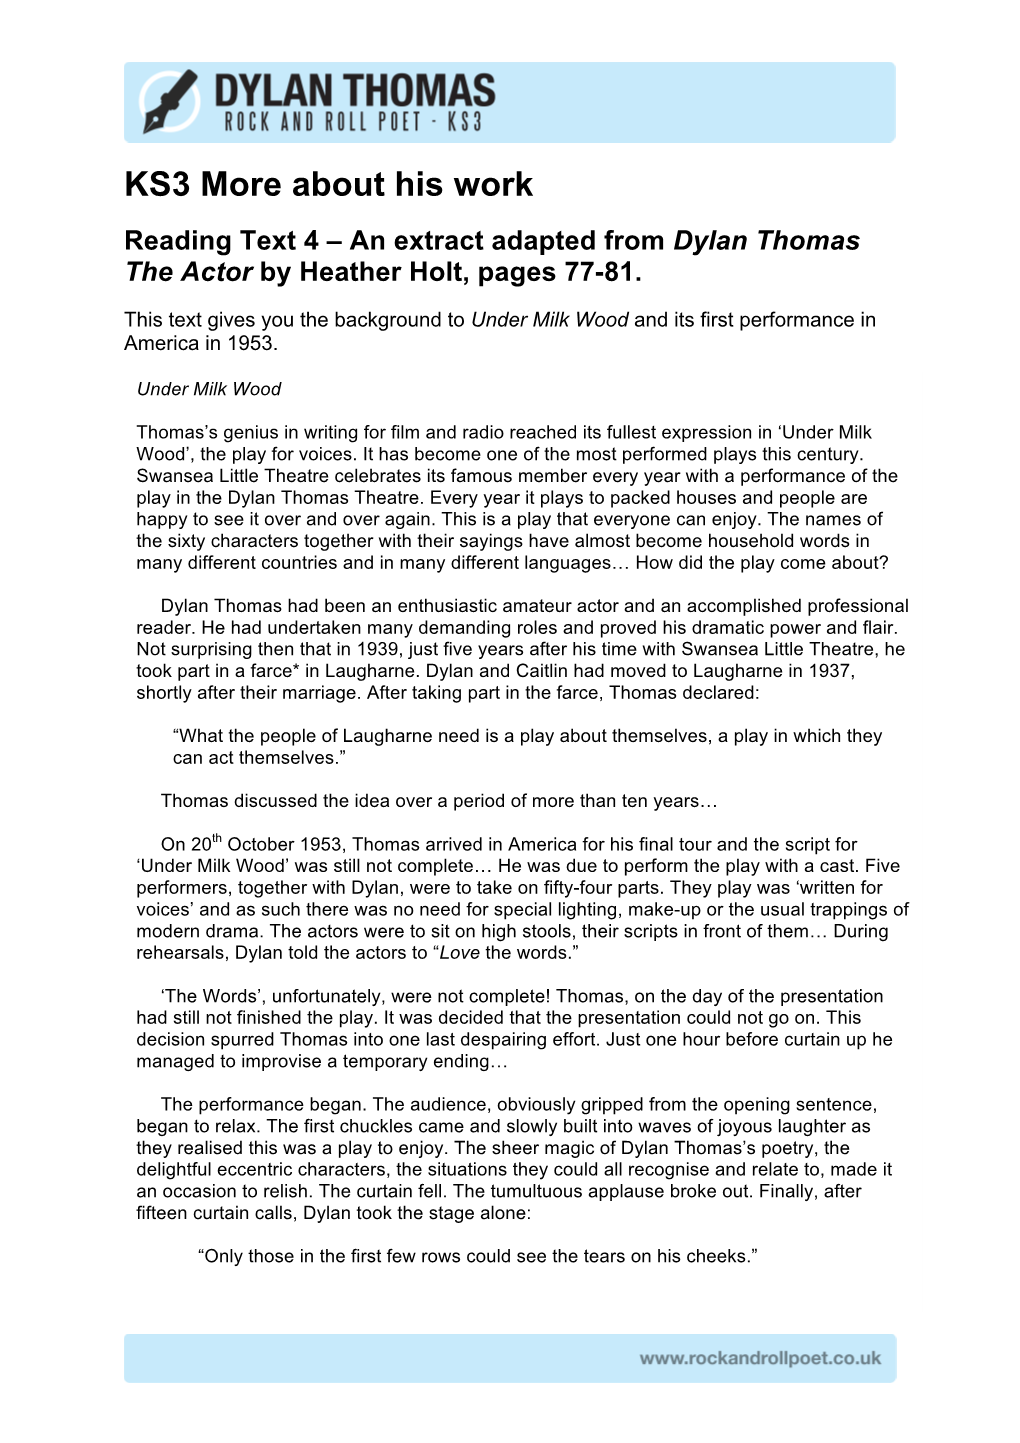 KS3 More About His Work Reading Text 4 – an Extract Adapted from Dylan Thomas the Actor by Heather Holt, Pages 77-81